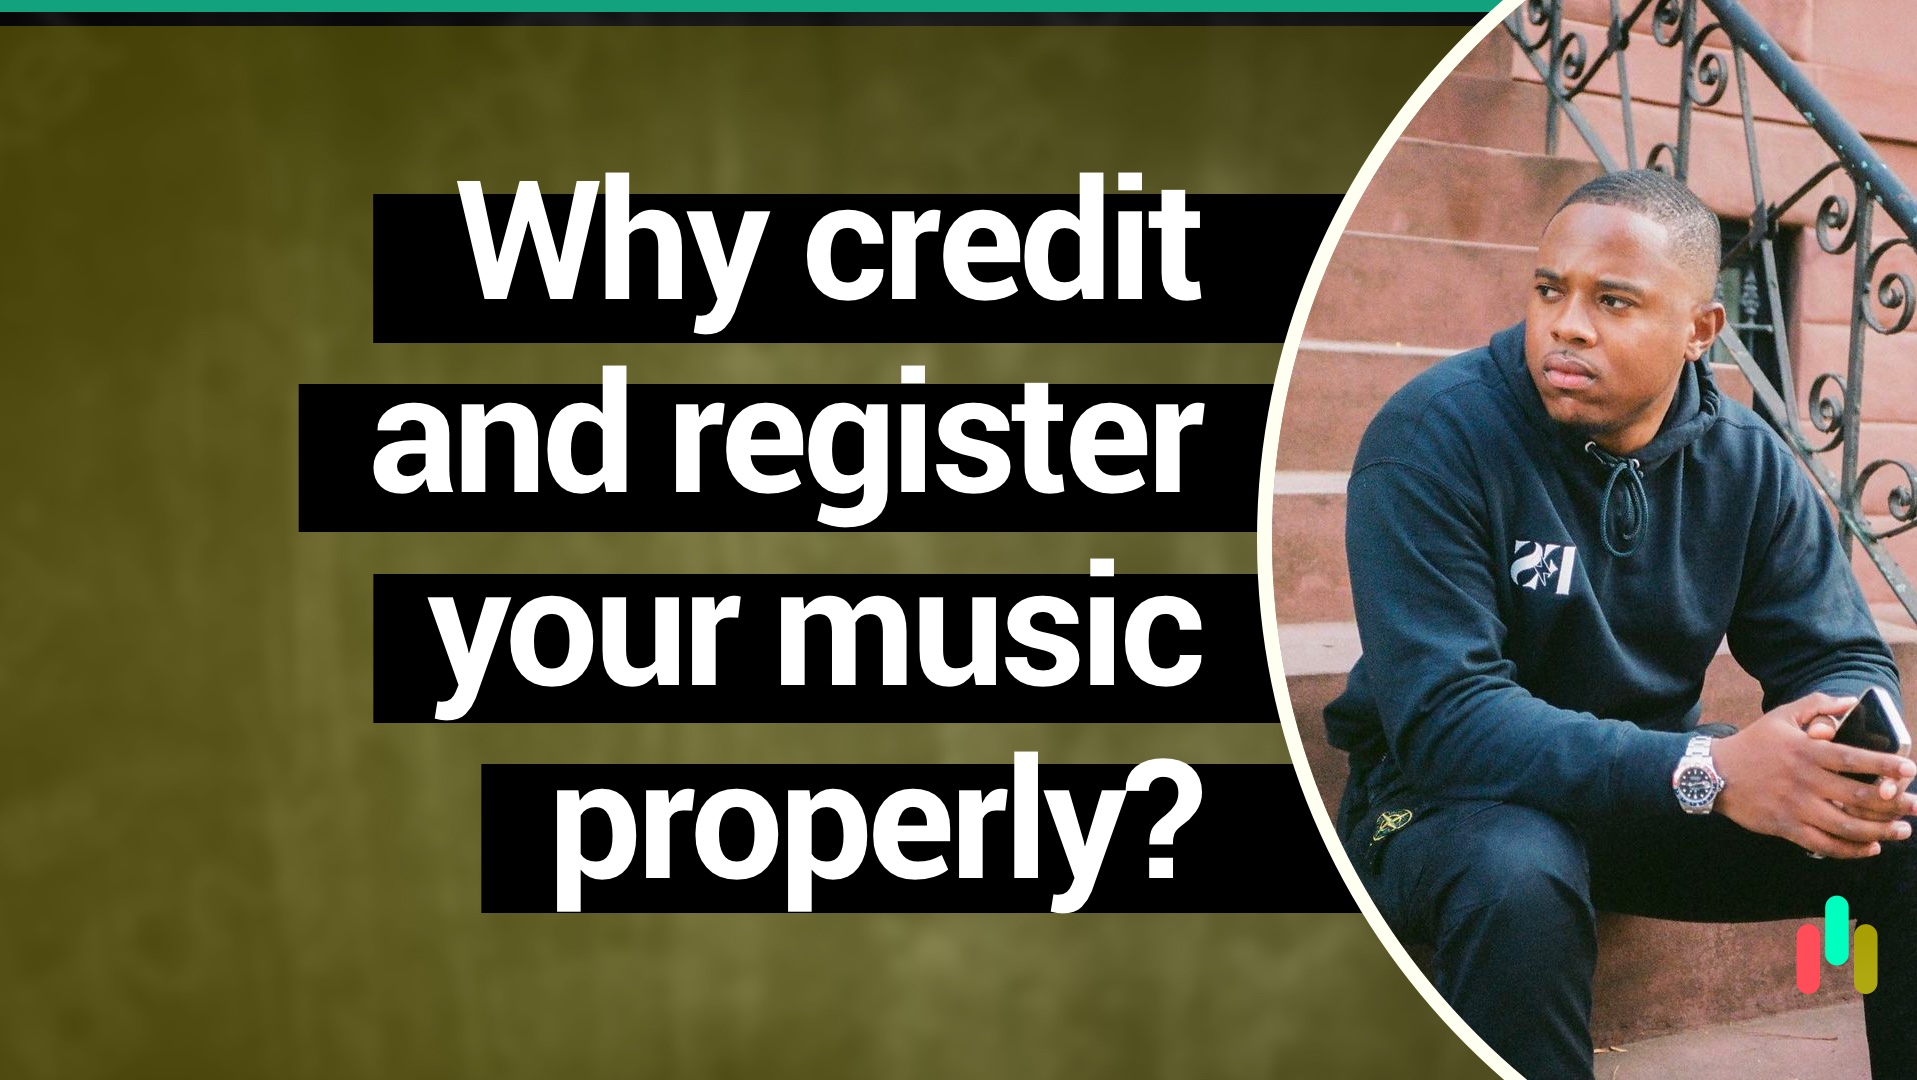 Why credit and register your music properly?